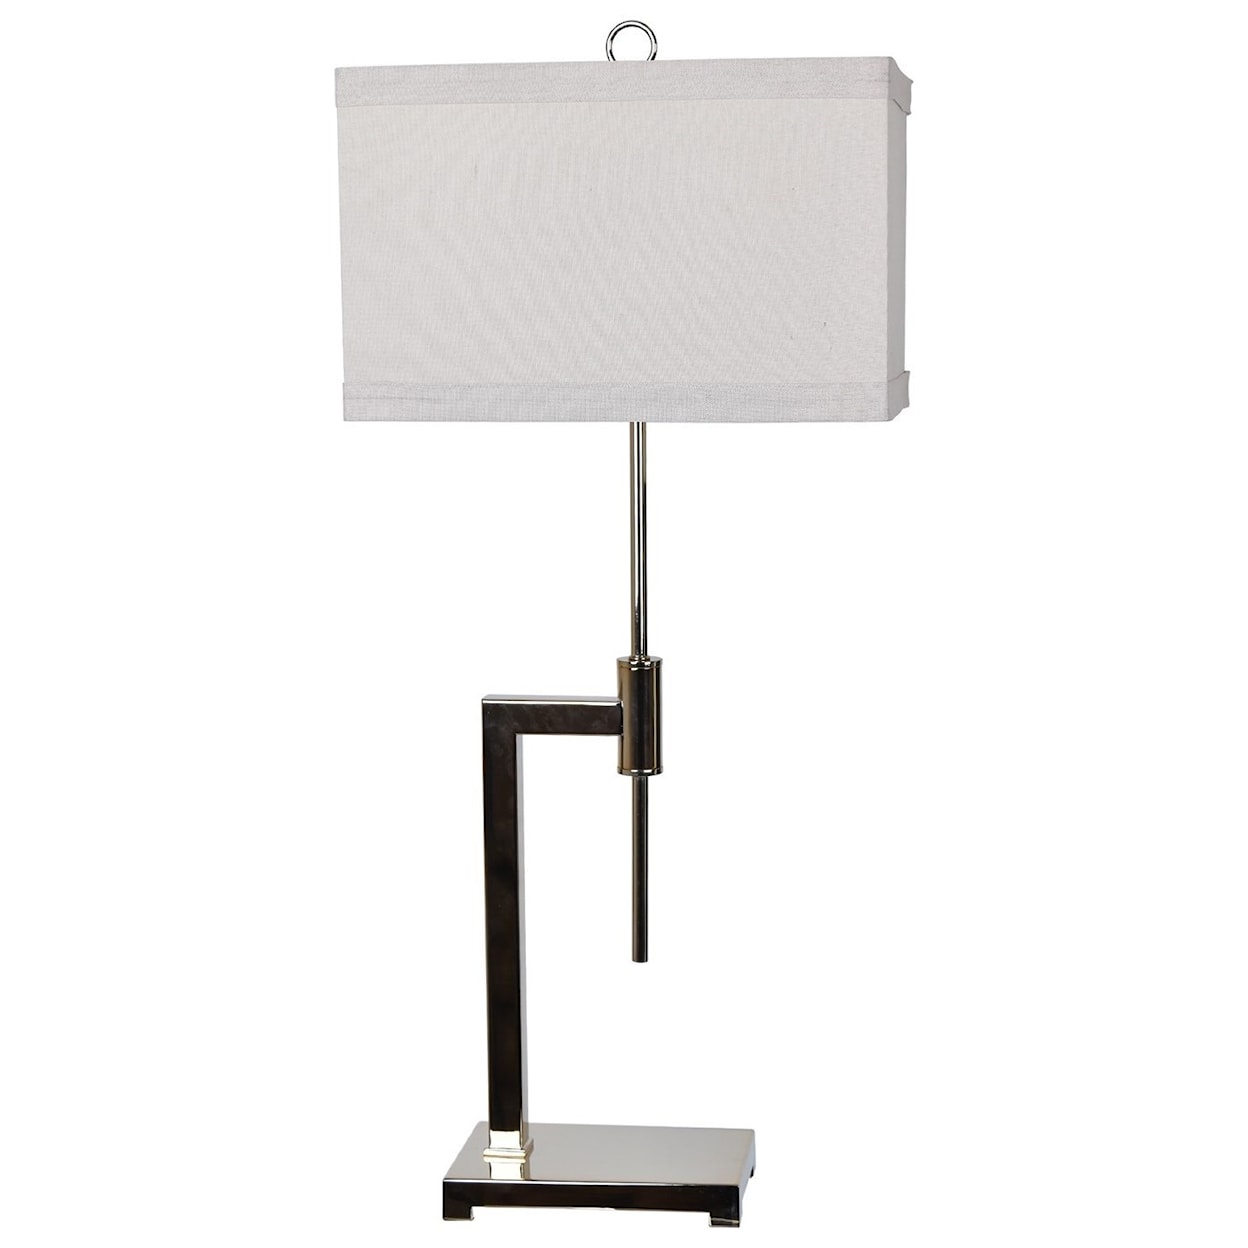 Crestview Collection Lighting Vincent Table Lamp